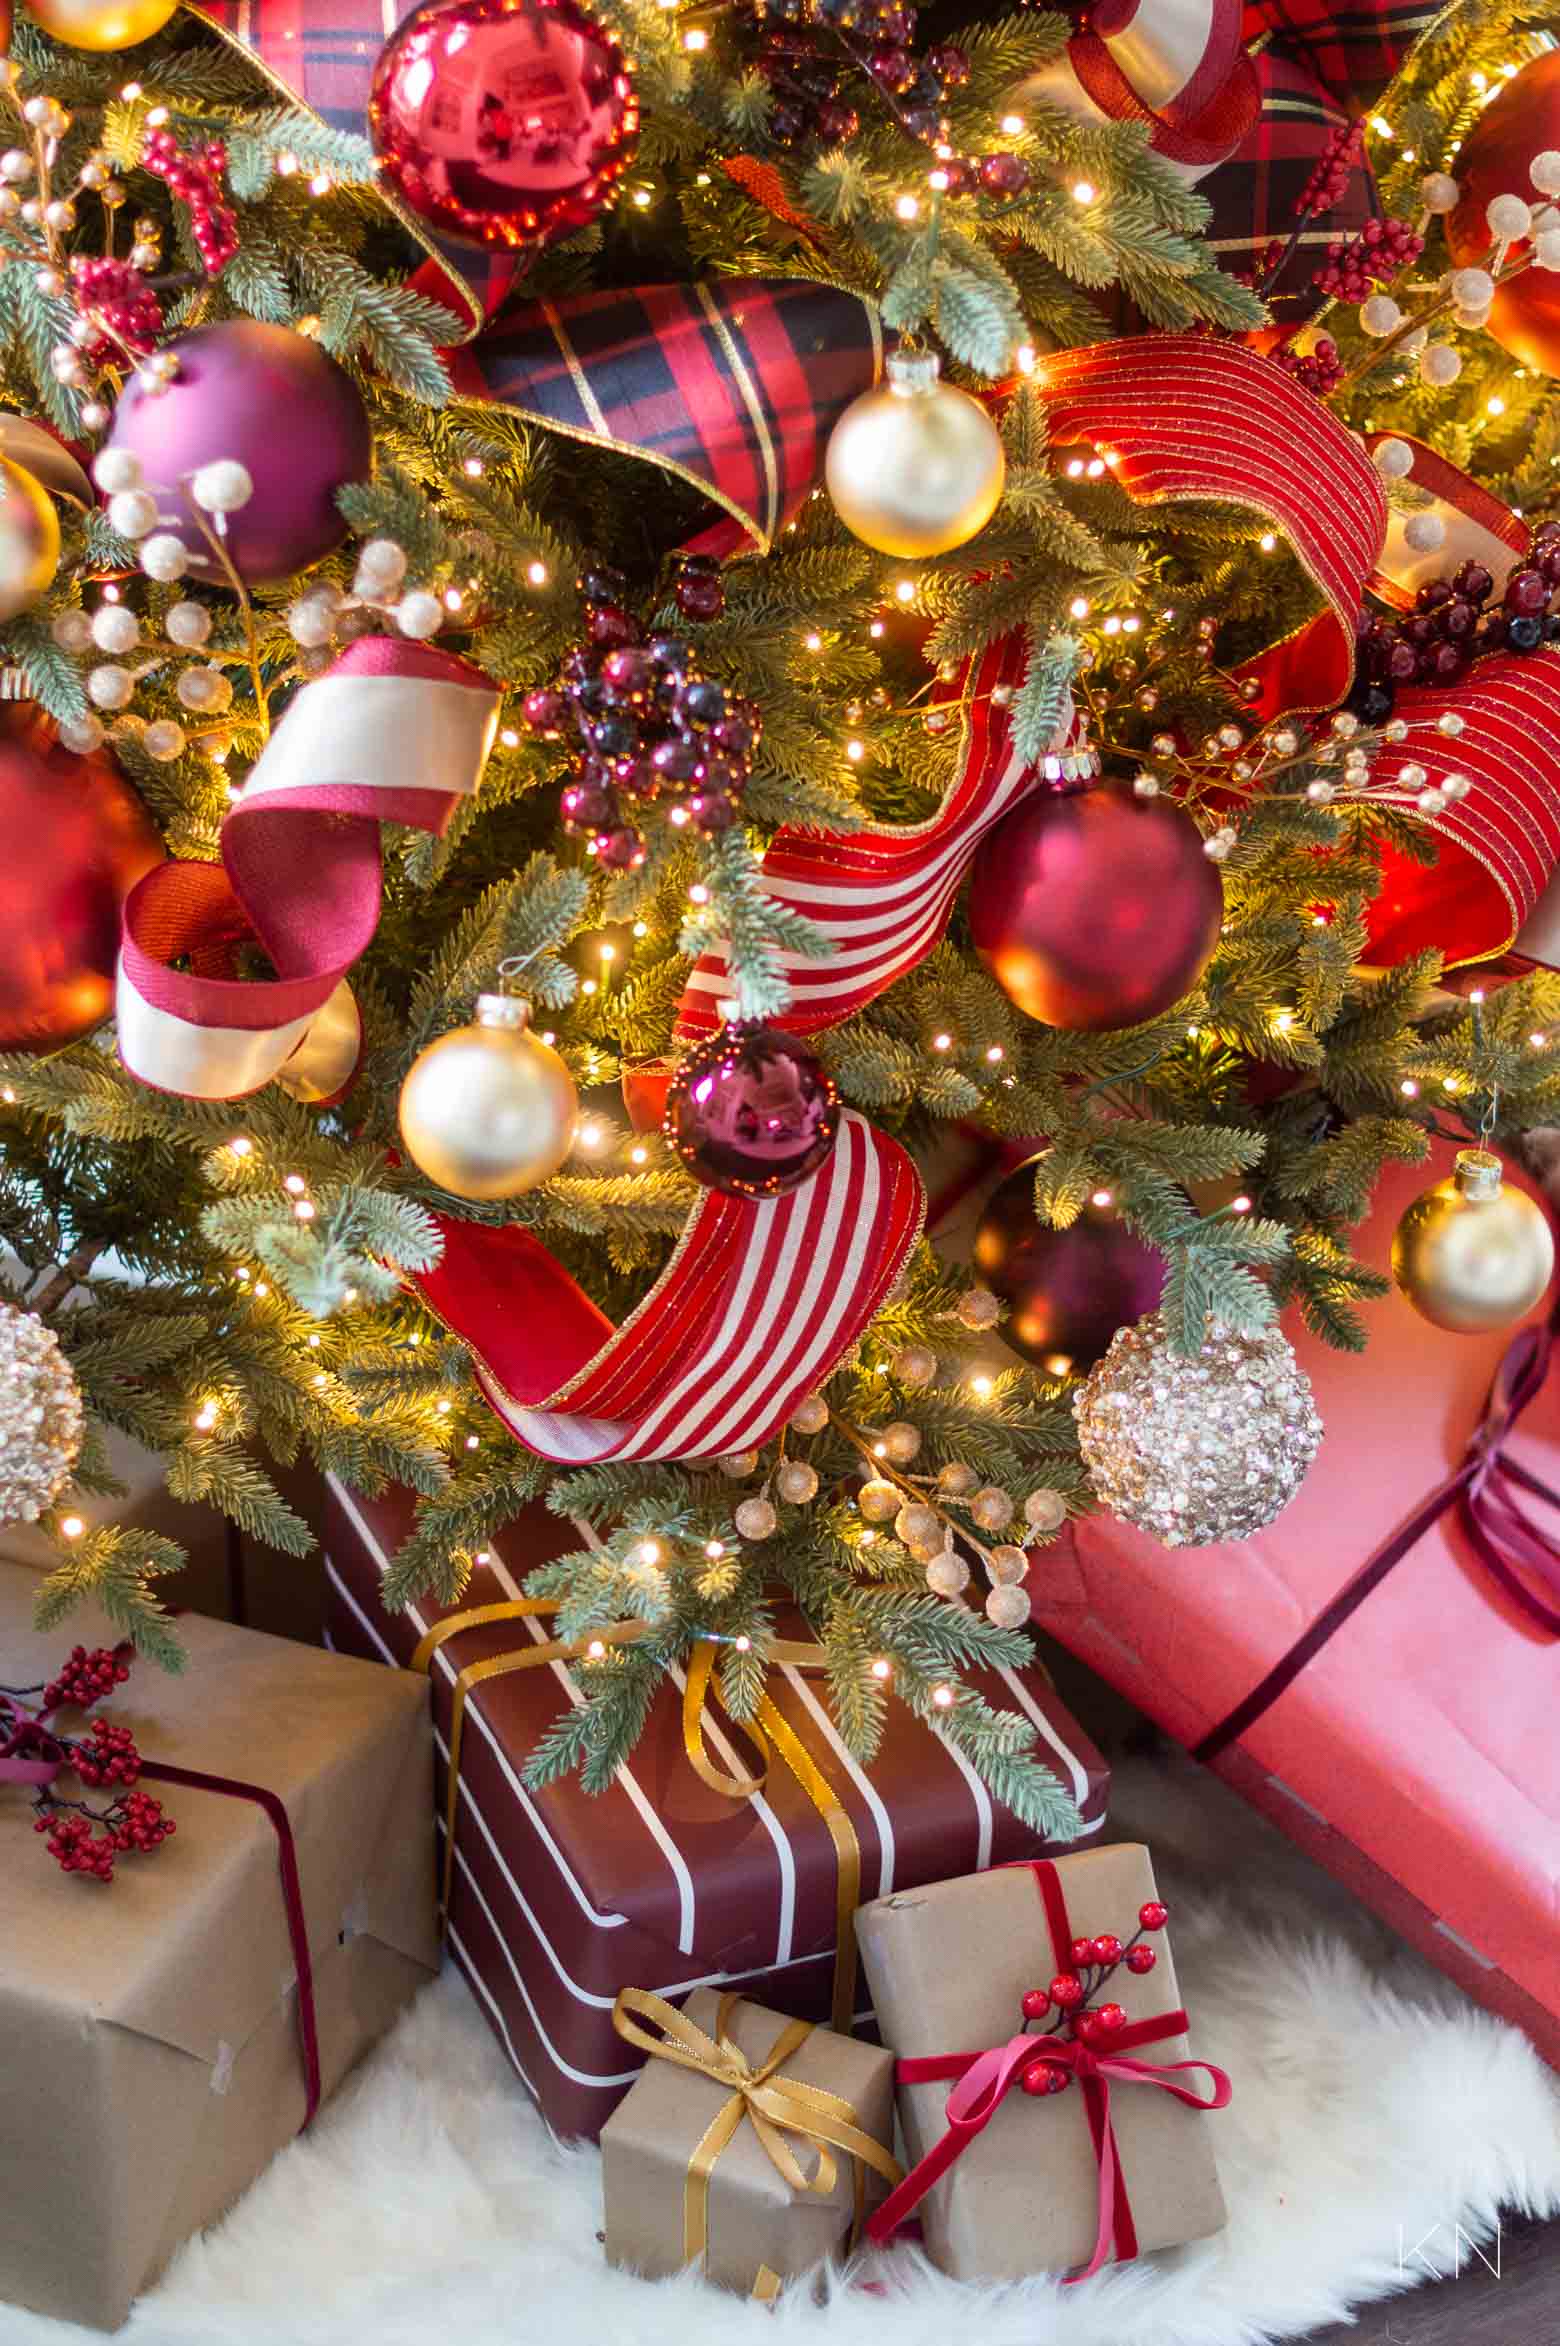 Red and gold Christmas Packages Under Red and gold Christmas tree